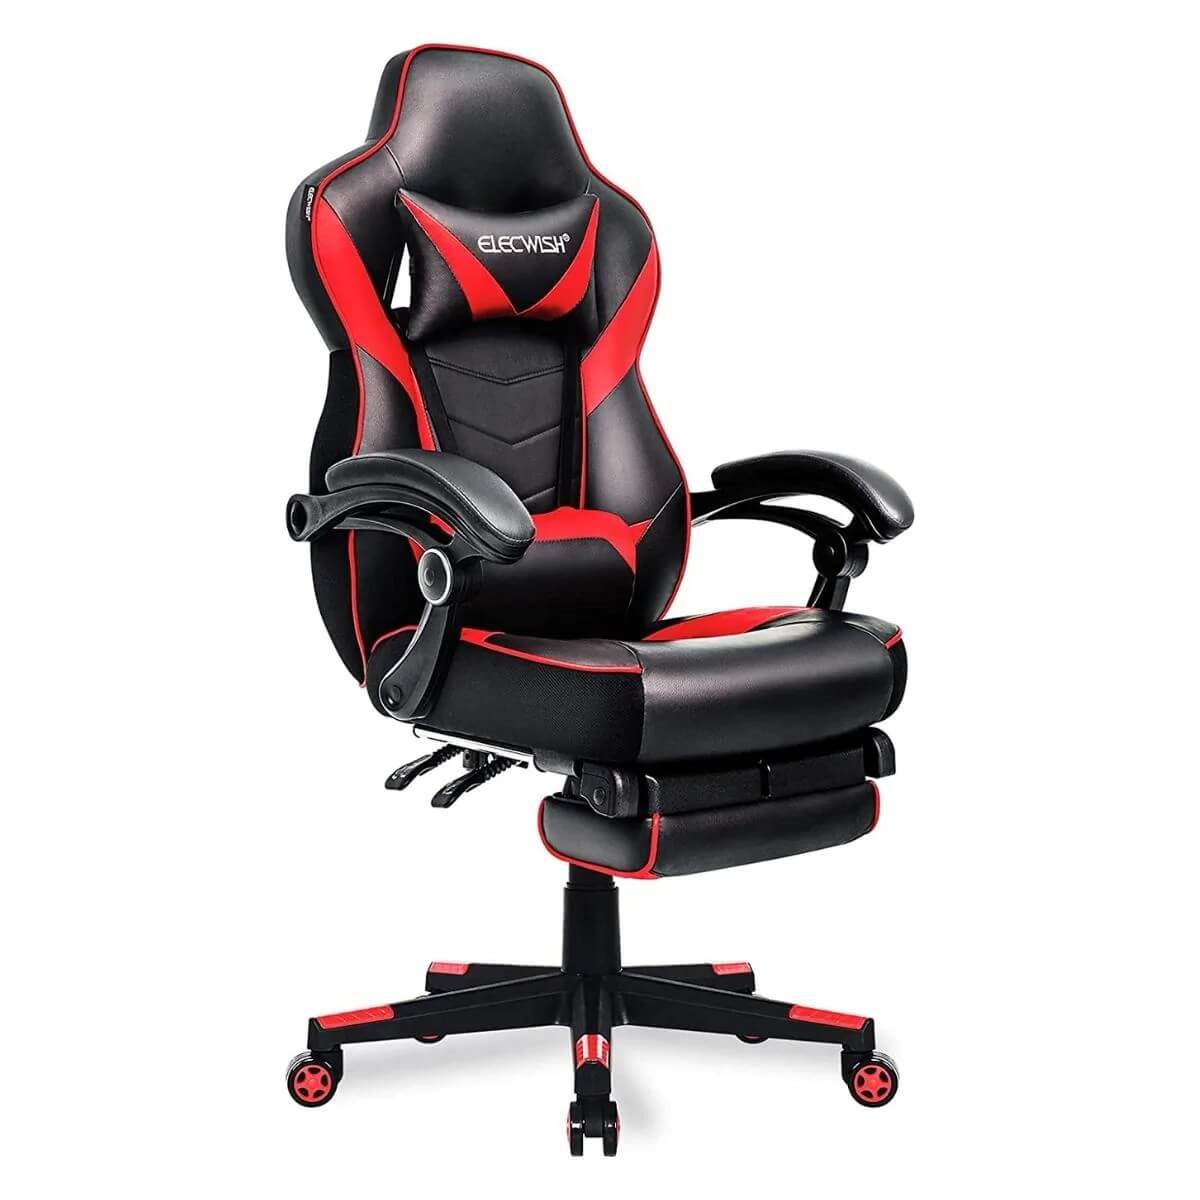 Elecwish Video Game Chairs Red Gaming Chair With Footrest OC087